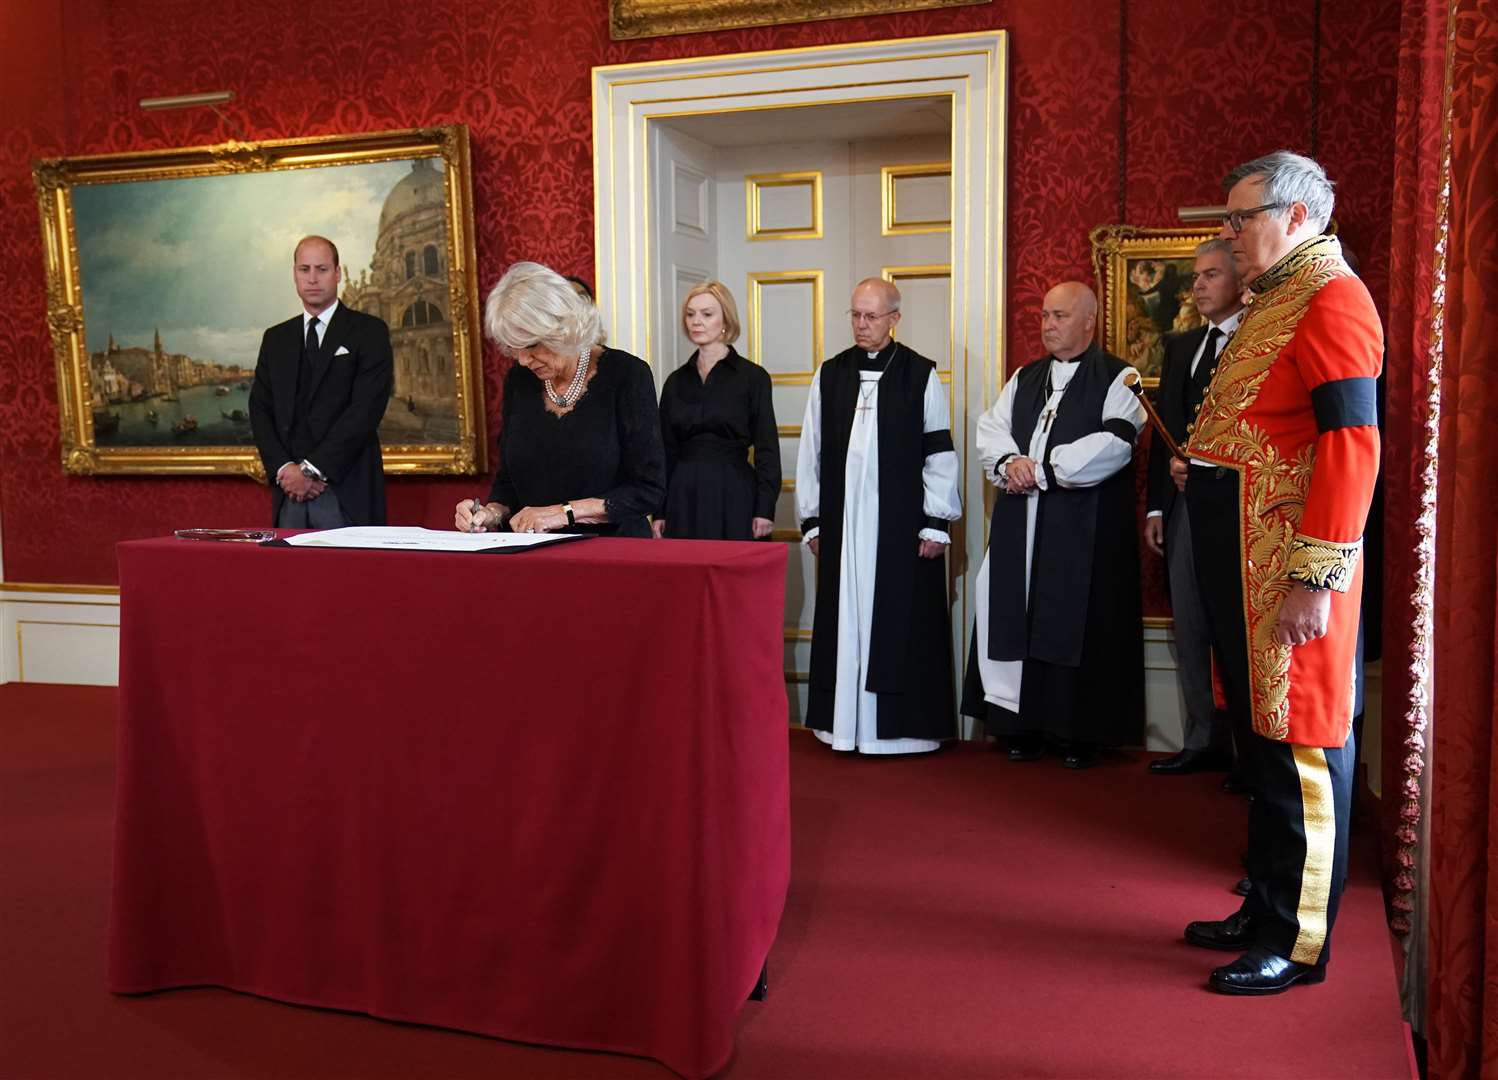 The Queen Consort signs the Proclamation of Accession of King Charles III, watched by (left-right back) the Prince of Wales, Prime Minister Liz Truss , Archbishop of Canterbury, Justin Welby, Archbishop of York, Stephen Cottrell, Lord Chancellor of the Privy Council Brandon Lewis and Earl Marshal, Edward Fitzalan-Howard, the Duke of Norfolk during the Accession Council ceremony at St James’s Palace, London, where King Charles III is formally proclaimed monarchy (Kirsty O’Connor/PA)